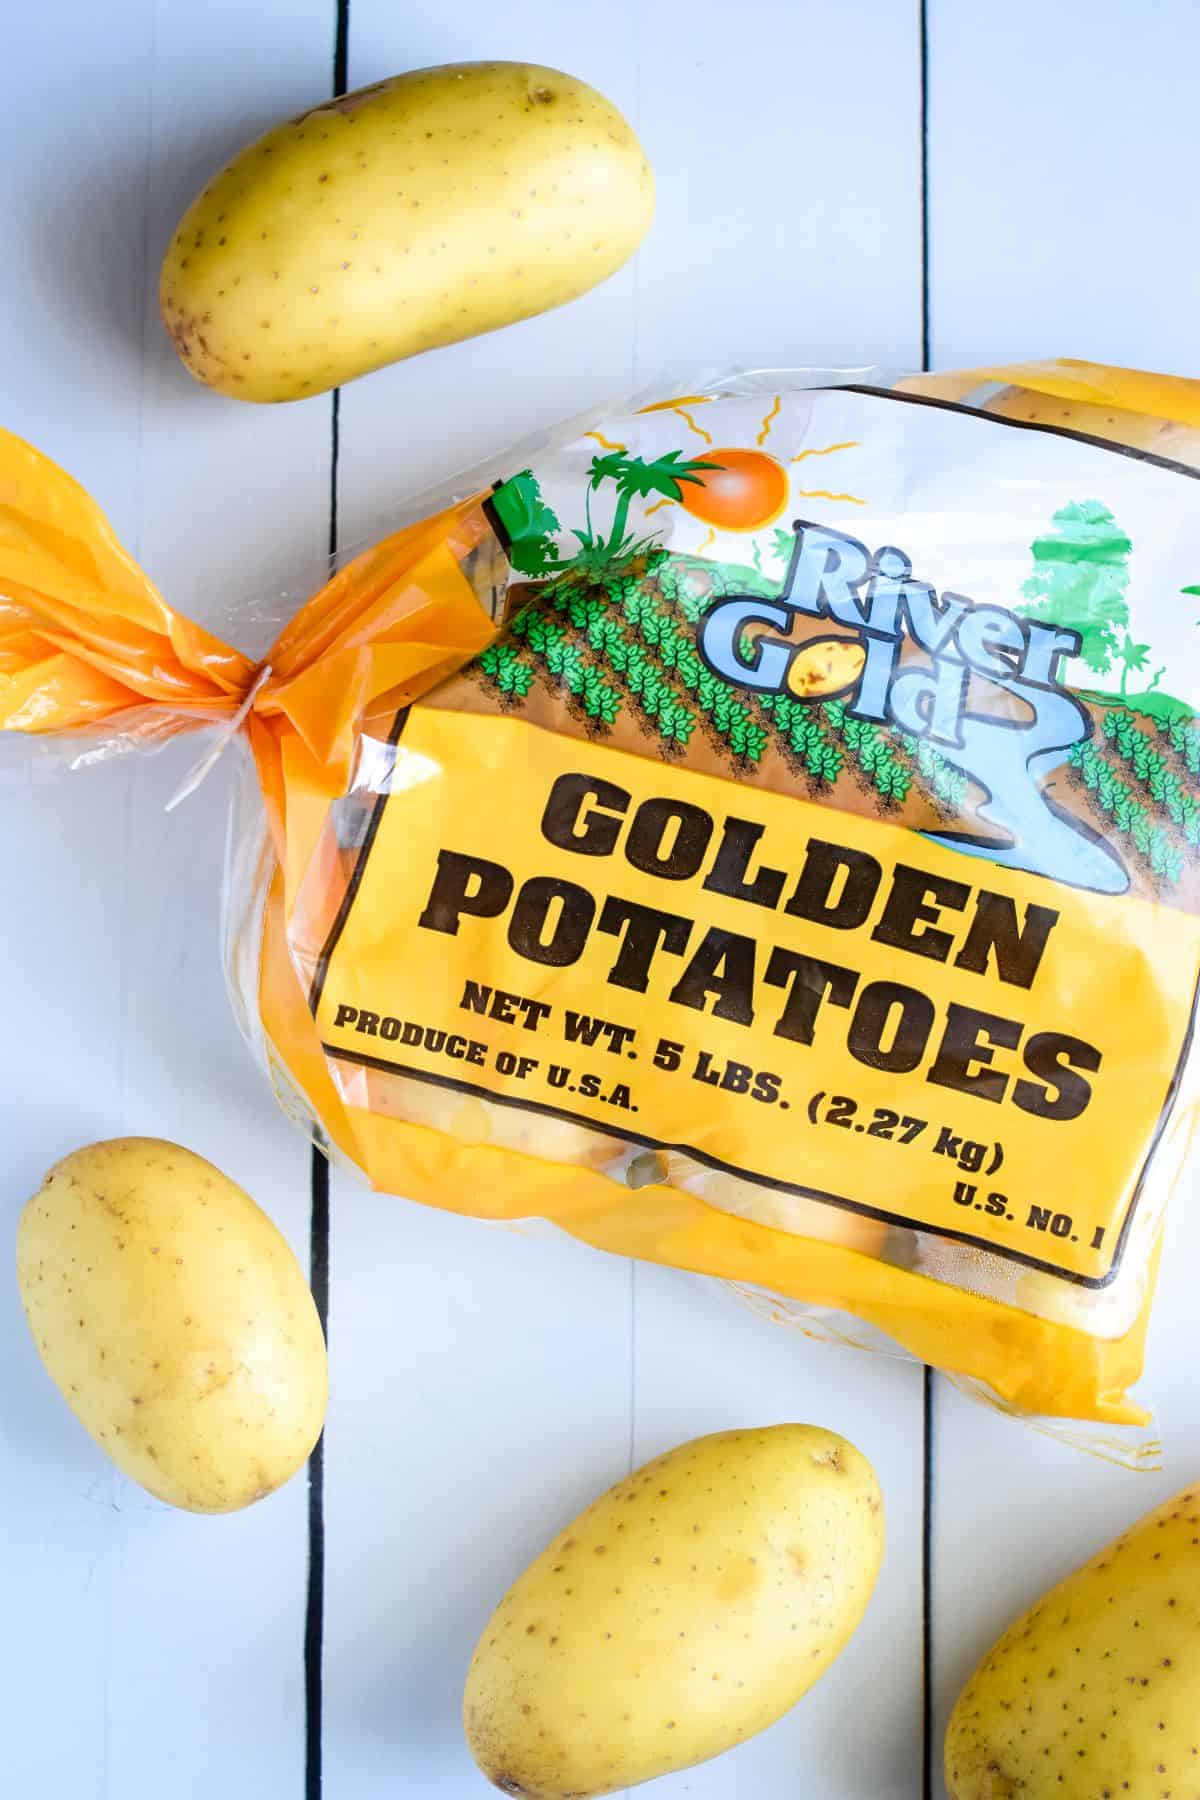 Bag of golden potatoes on table.